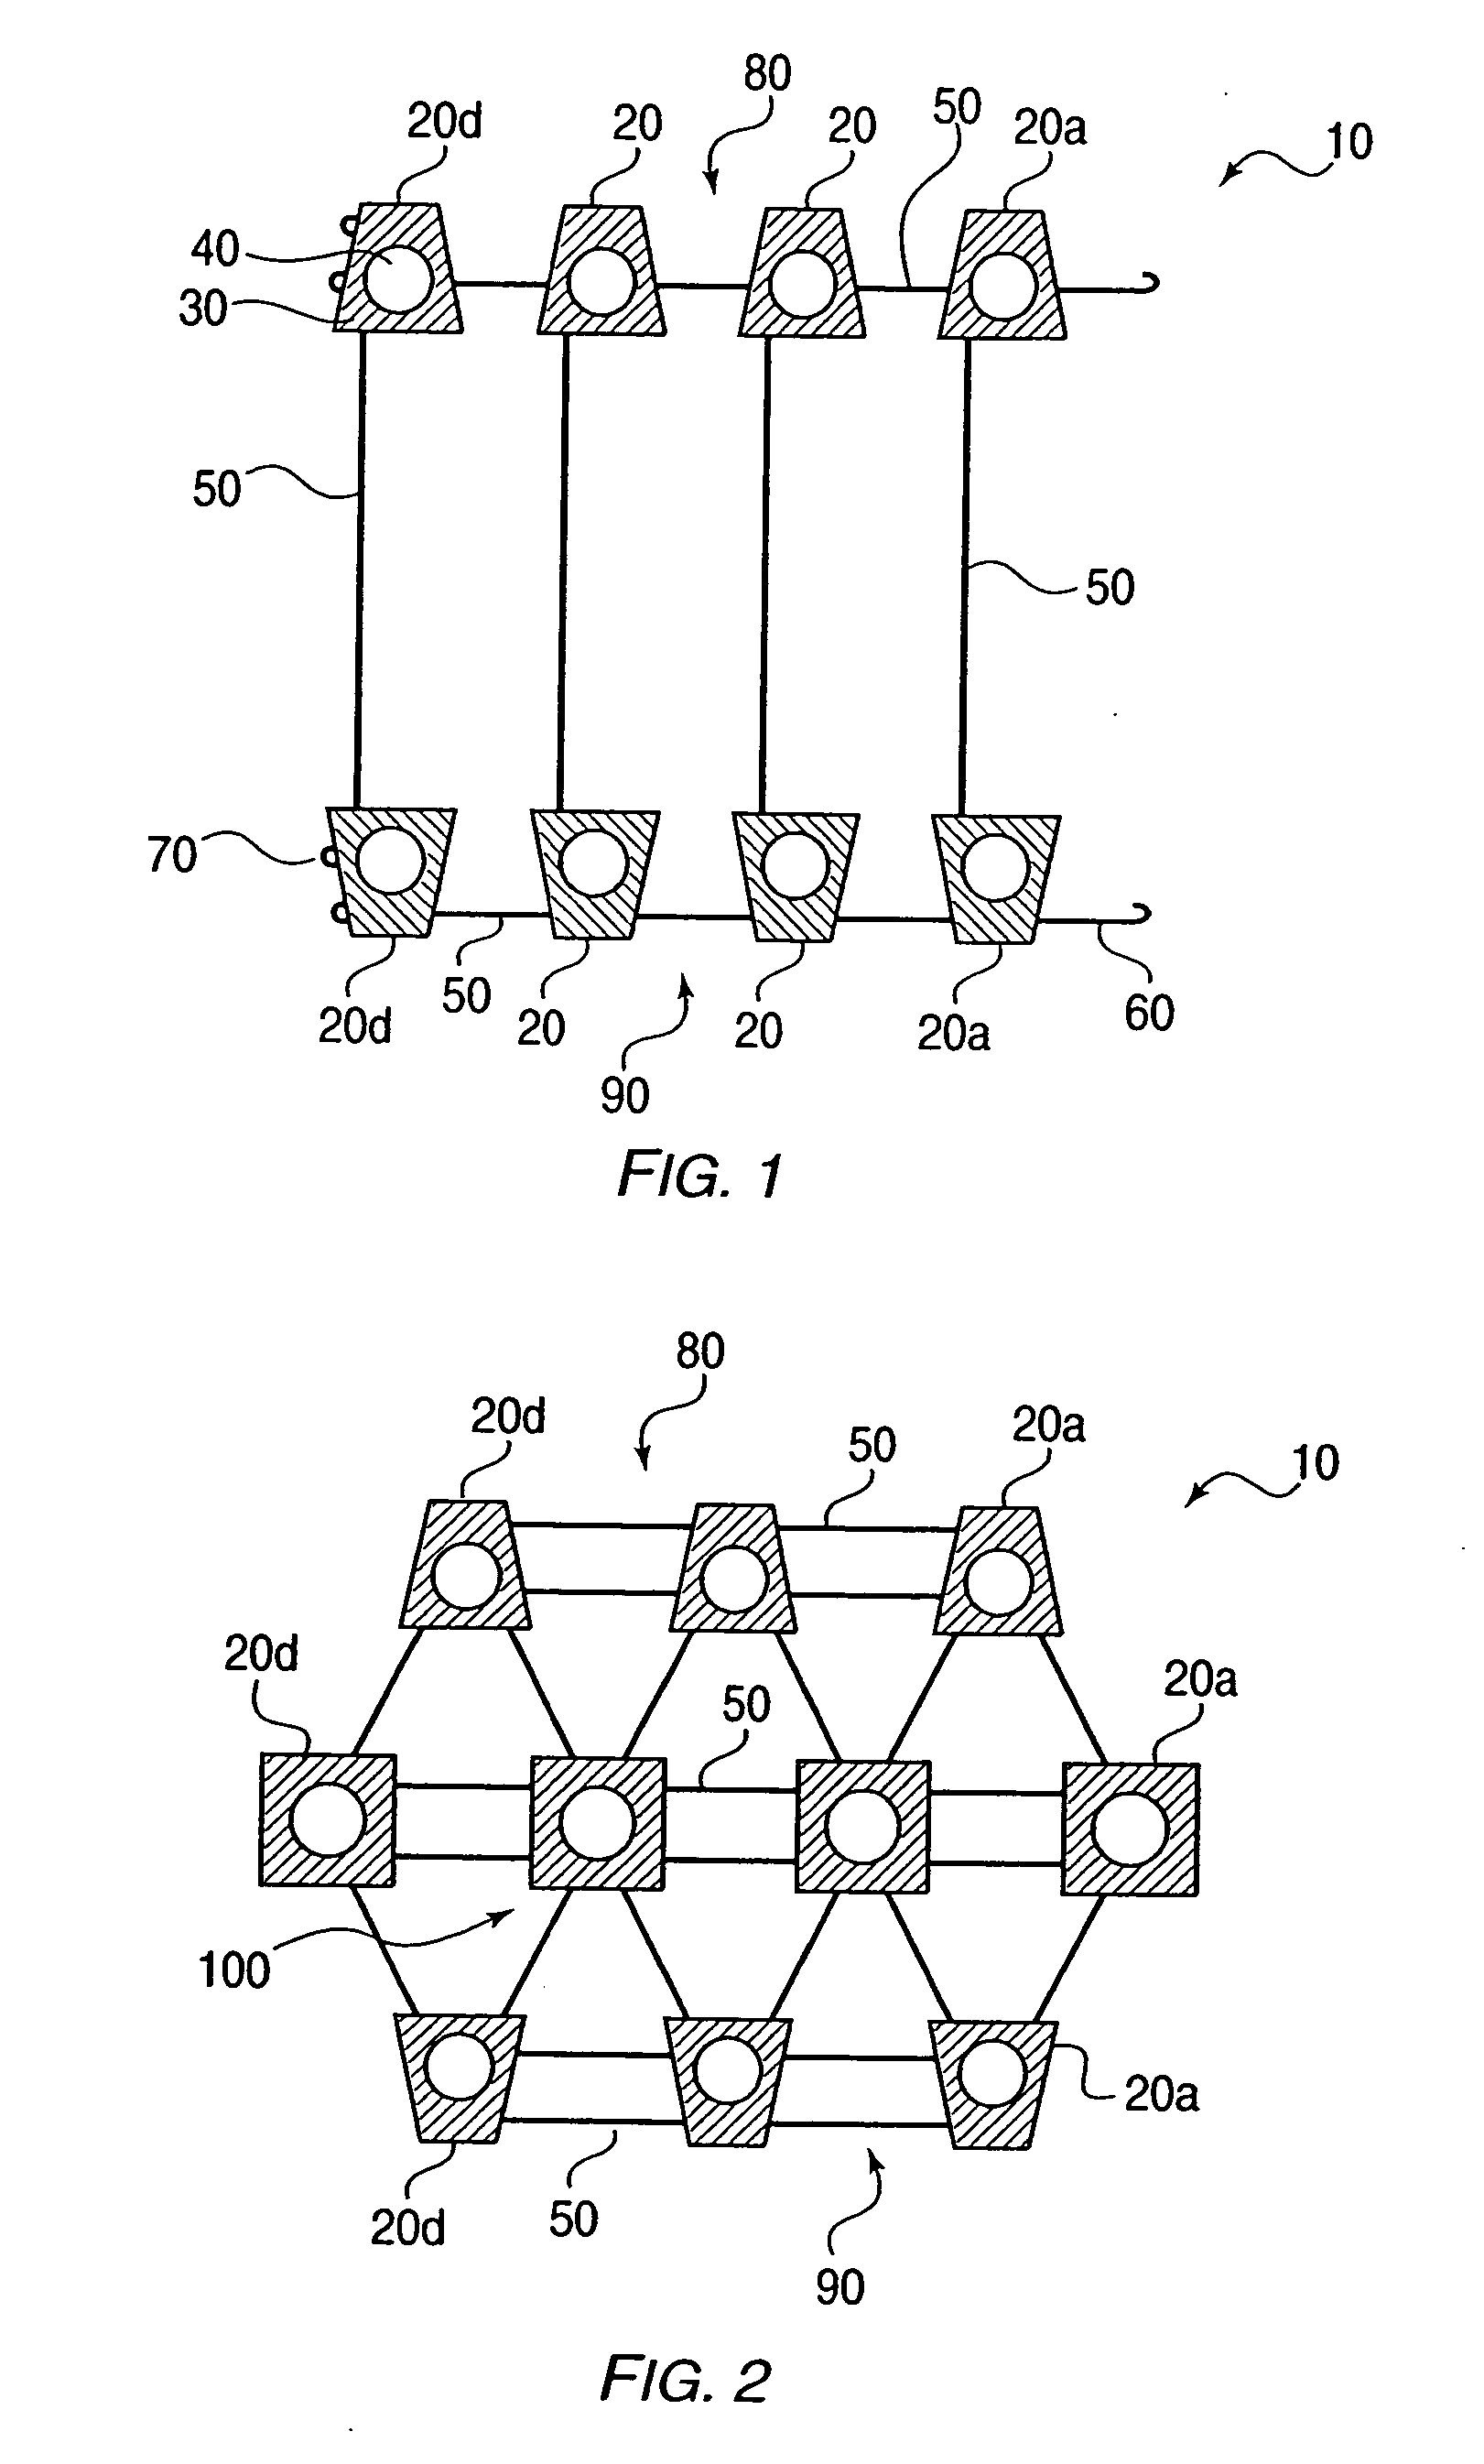 Delivery device for stimulating the sympathetic nerve chain